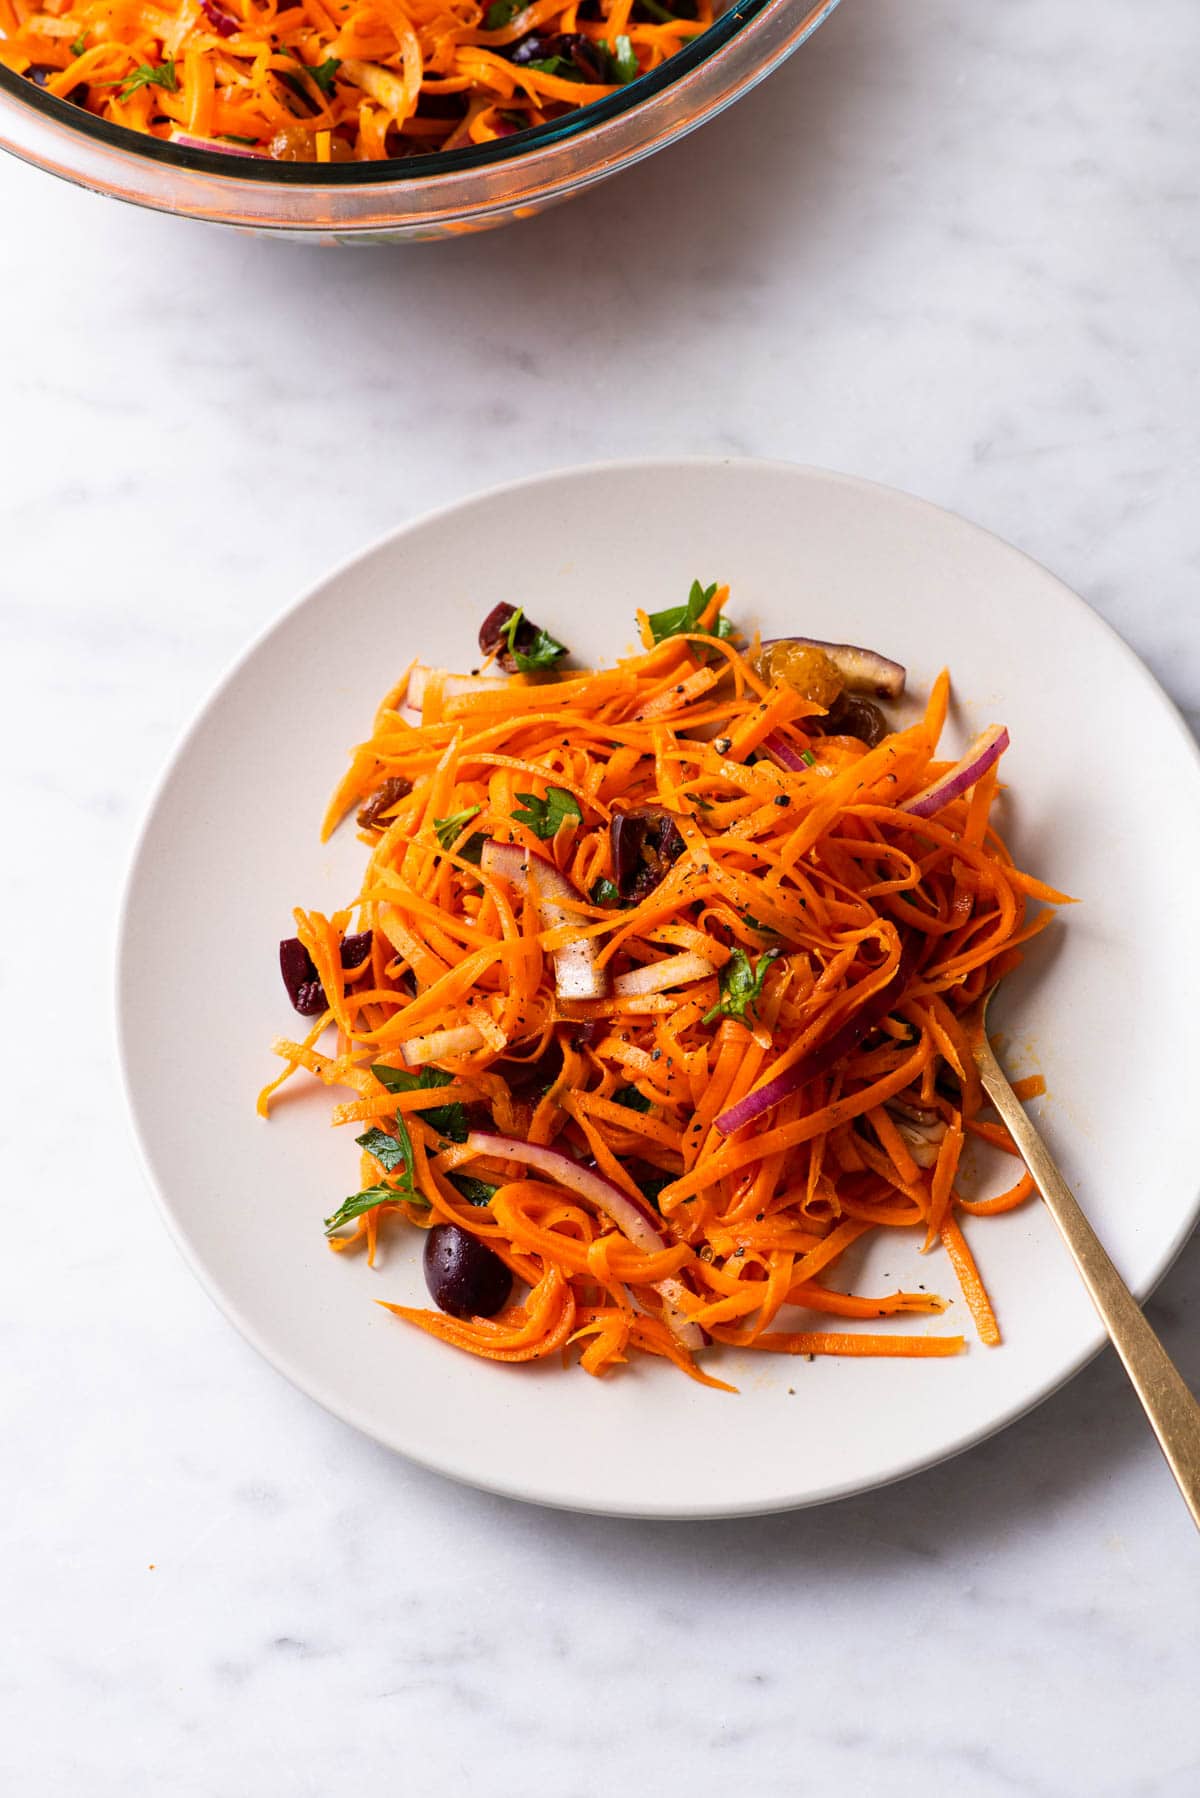 Moroccan shredded carrot salad with raisins on a white plate.